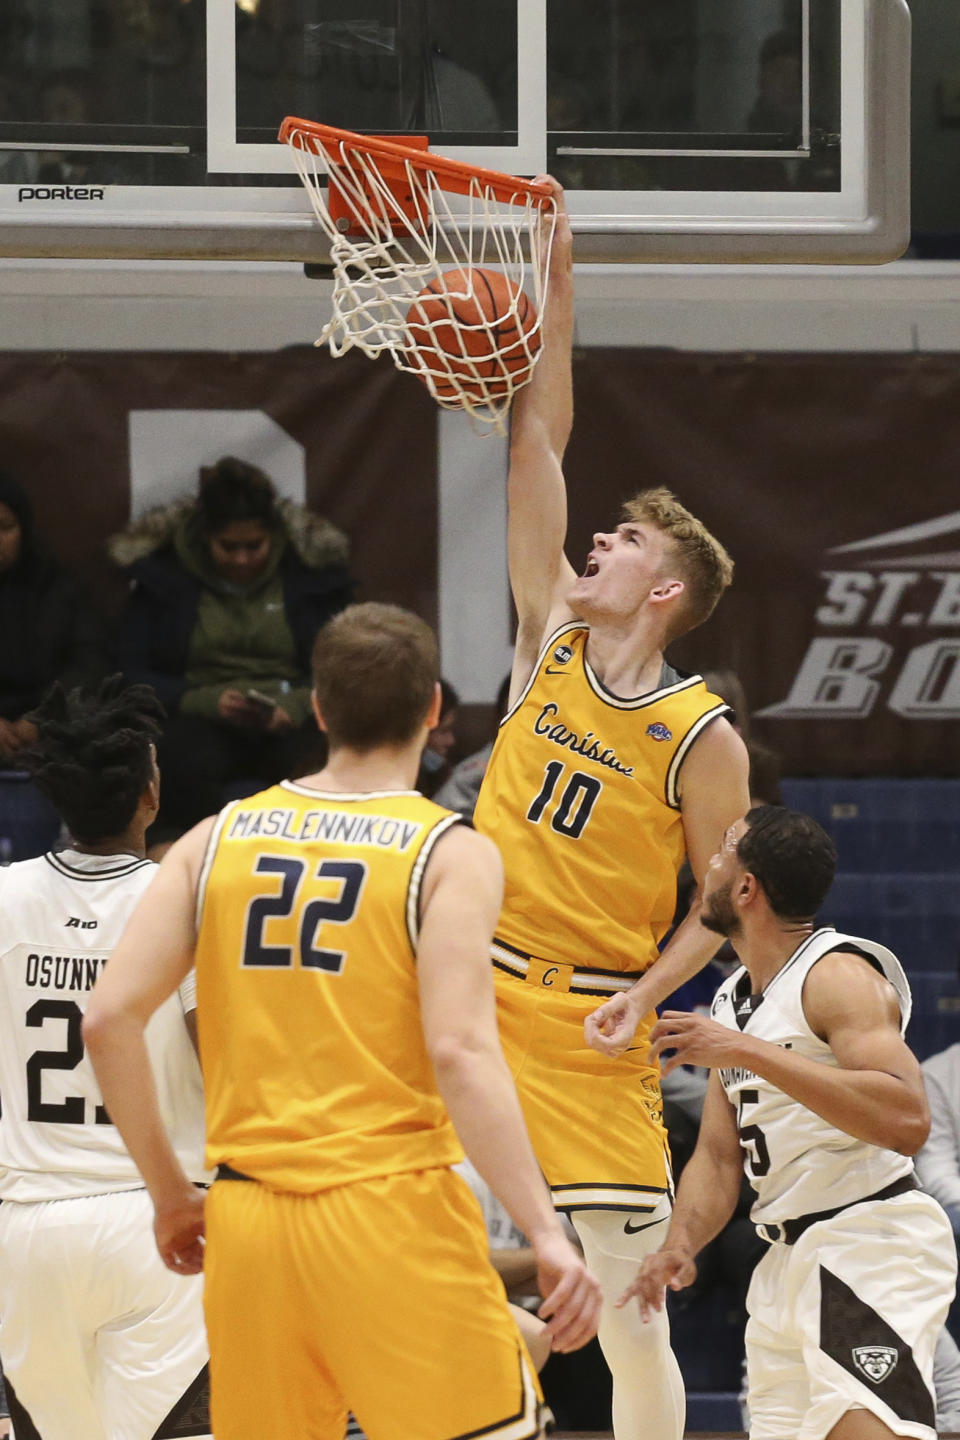 Canisius forward Jacco Fritz (10) dunks and his fouled by St. Bonaventure guard Jaren Holmes (5) during the first half of an NCAA college basketball game Sunday, Nov. 14, 2021, in Olean, N.Y. (AP Photo/Joshua Bessex)